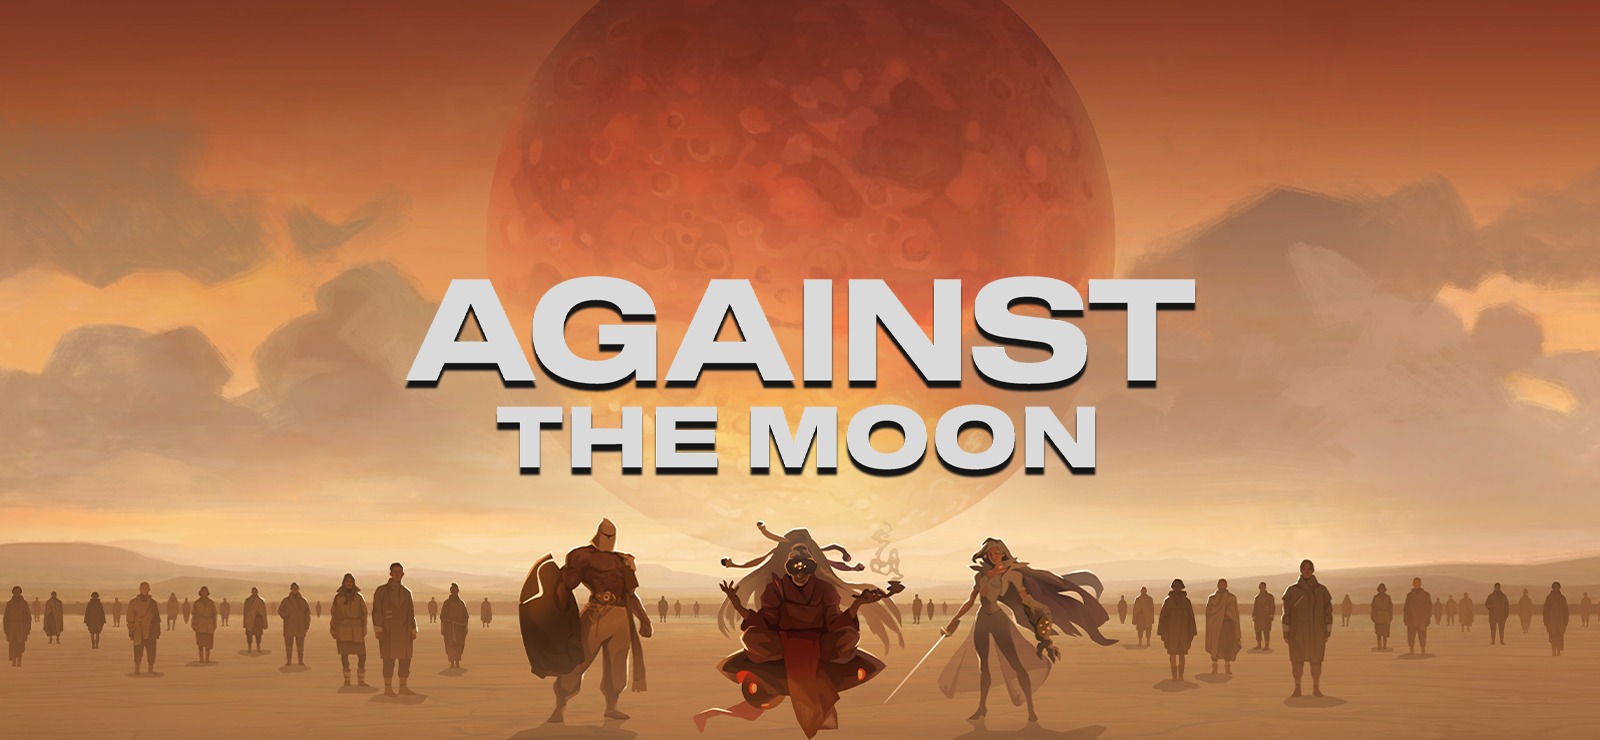 Against the Moon – A Lane-Based Combat Game With Special Names